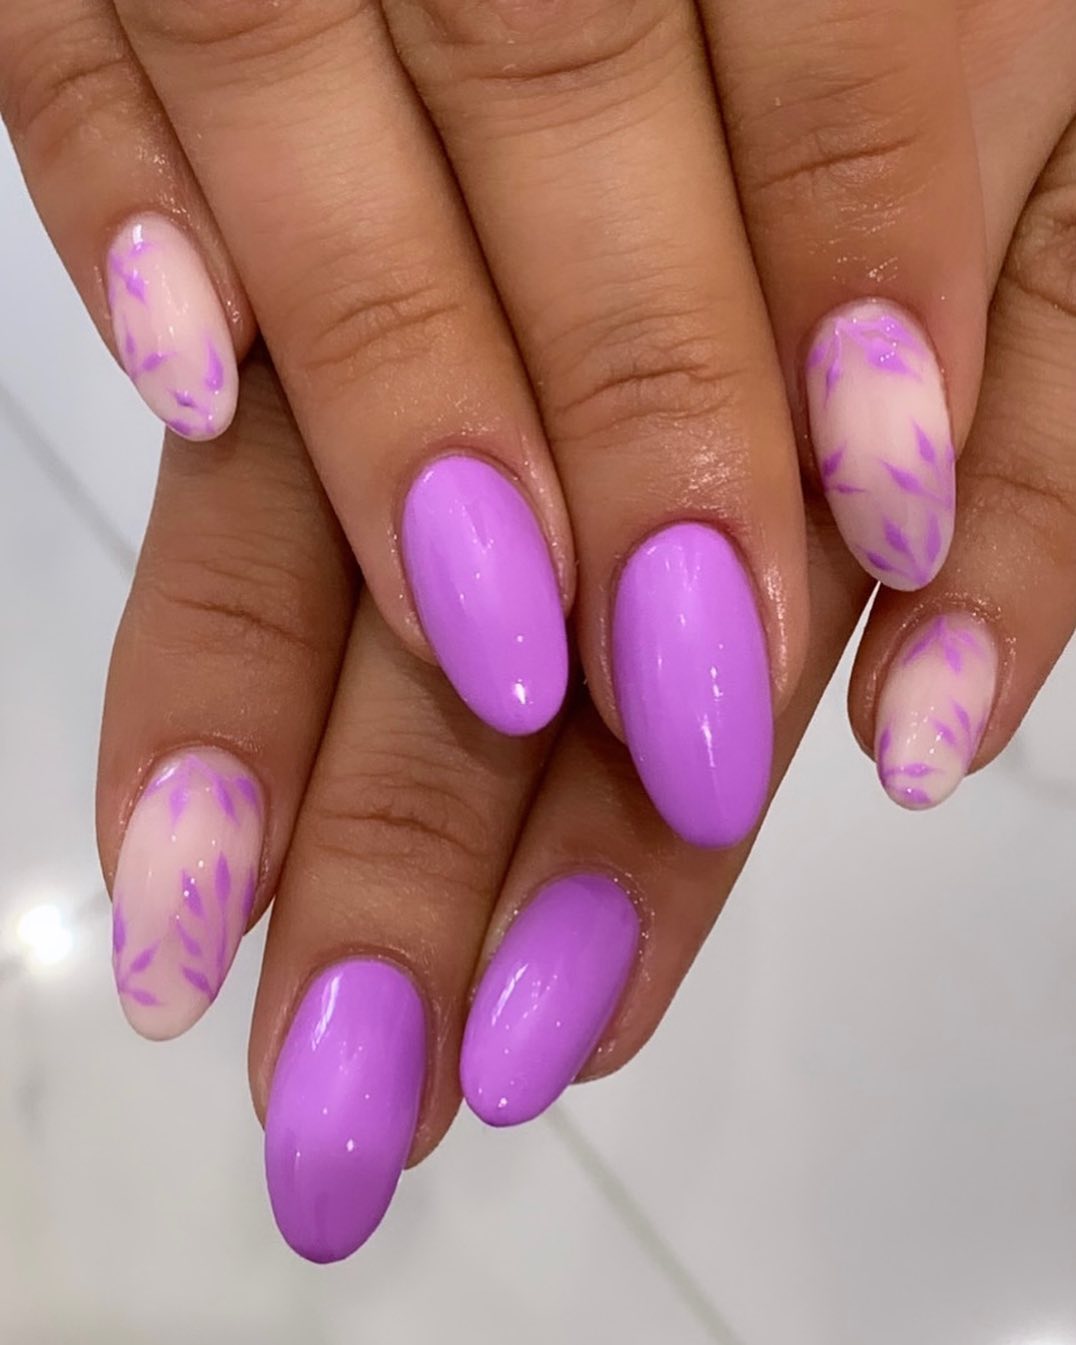 Purple almond nails such as these will look the prettiest on younger women who enjoy pastel colors.